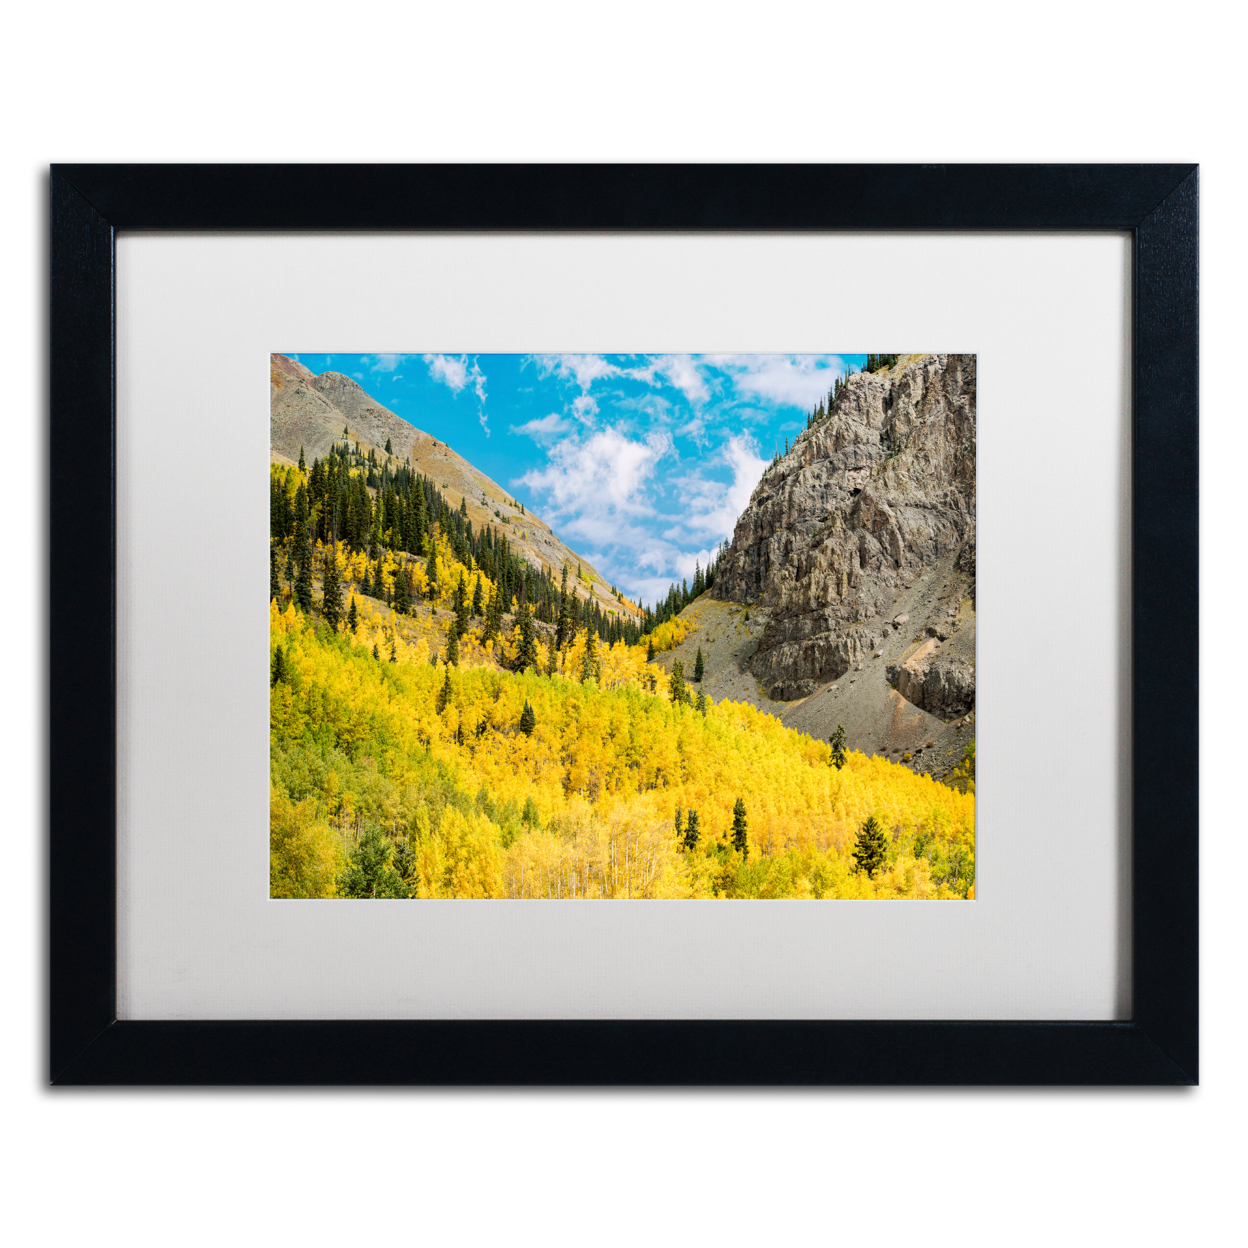 Michael Blanchette Photography 'Mountain Divide' Black Wooden Framed Art 18 X 22 Inches